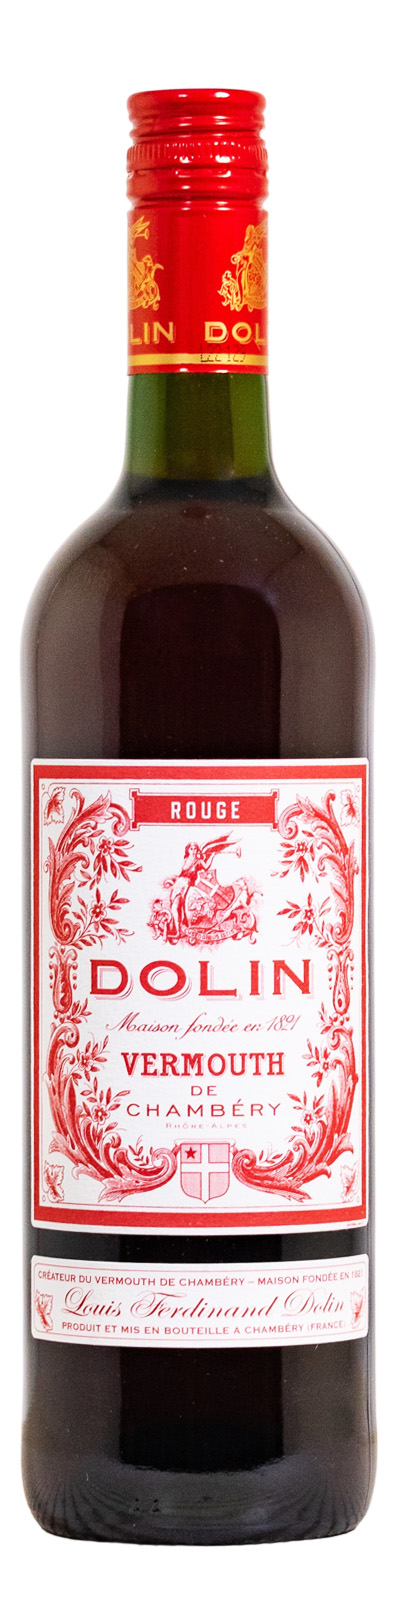 Dolin Vermouth Rouge - 0,75L 16% vol